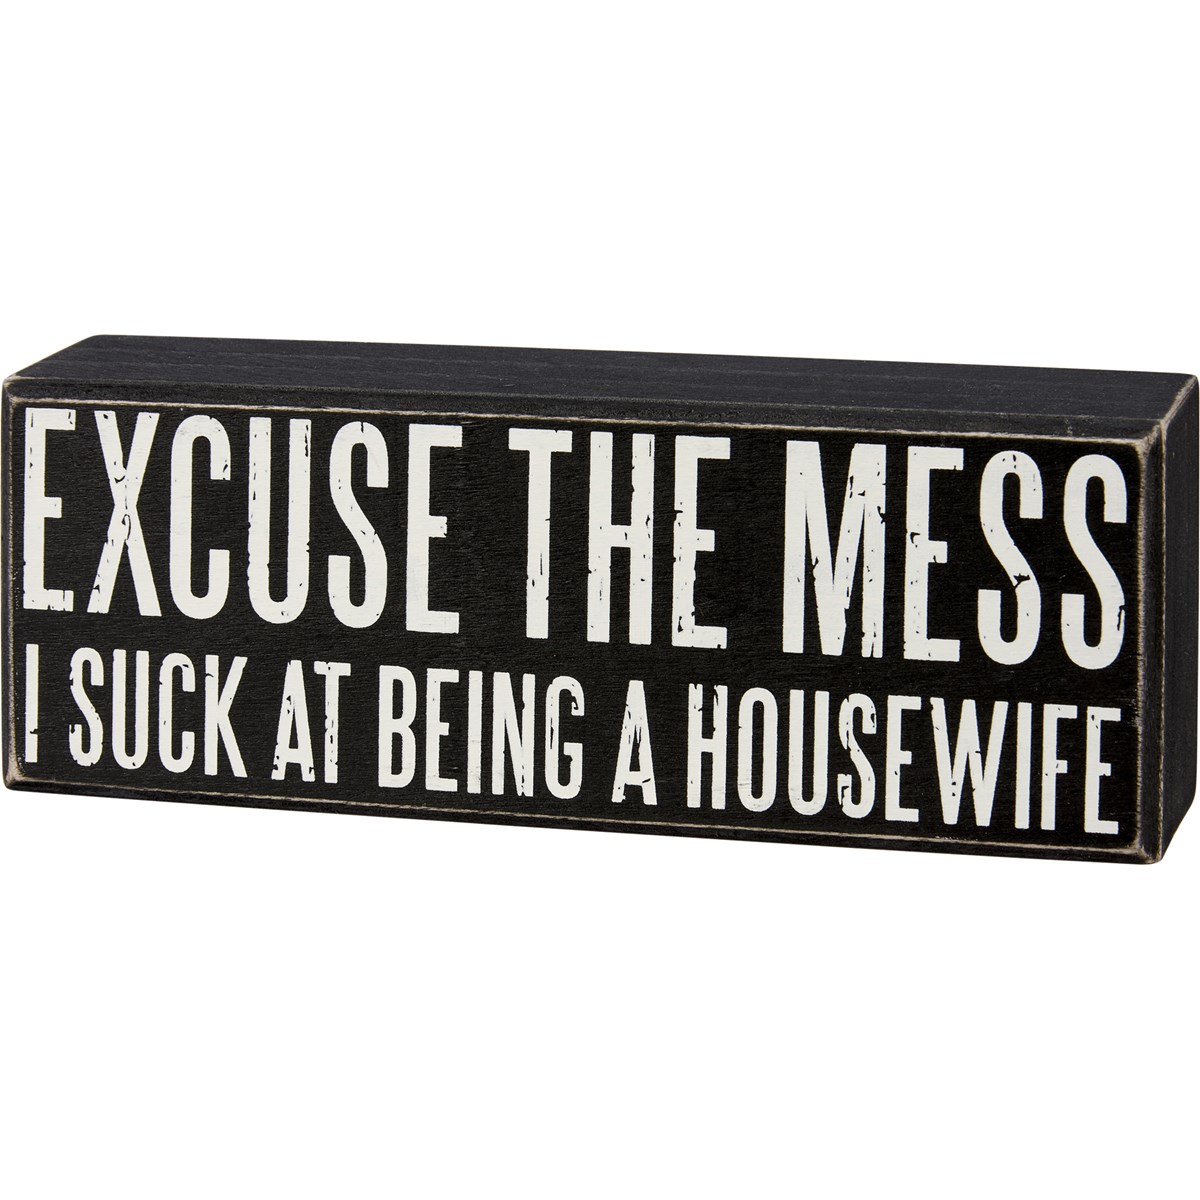 Excuse The Mess Box Sign - Wood